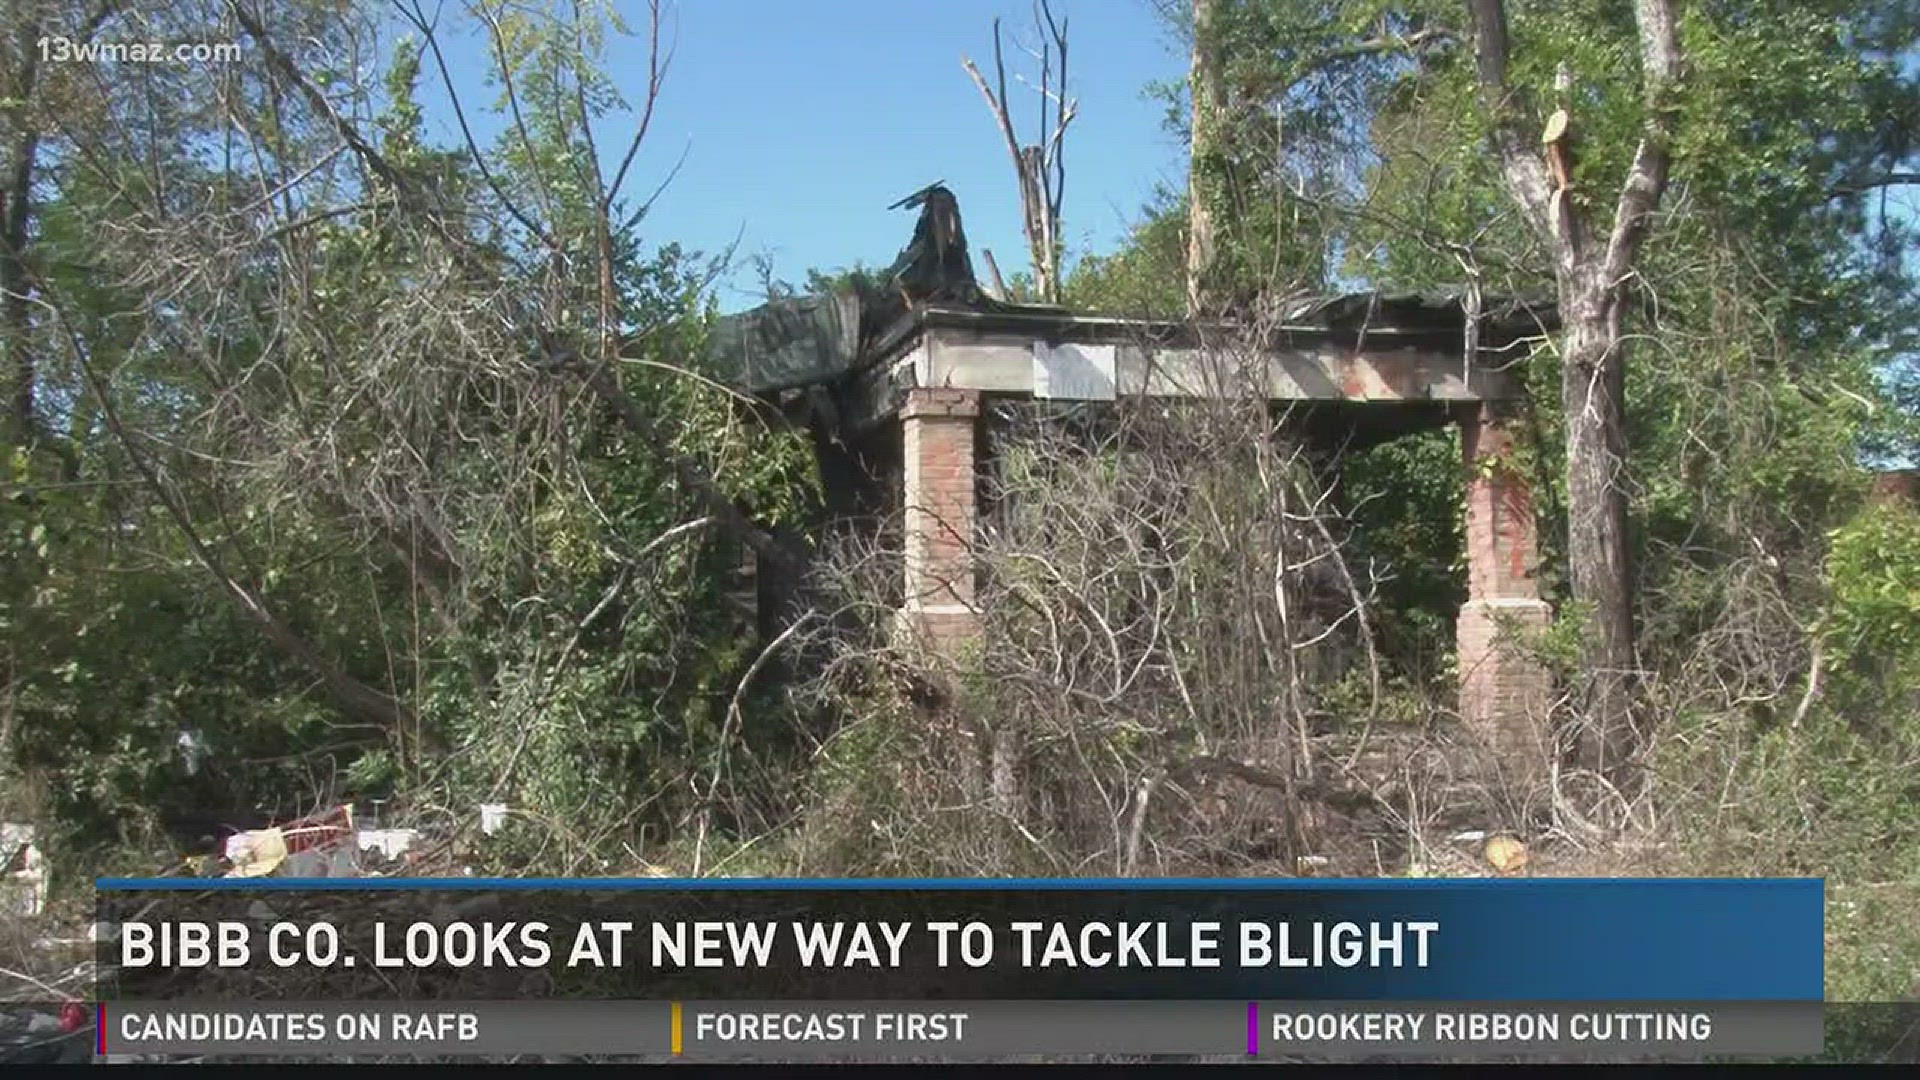 Bibb County looks at new way to tackle blight